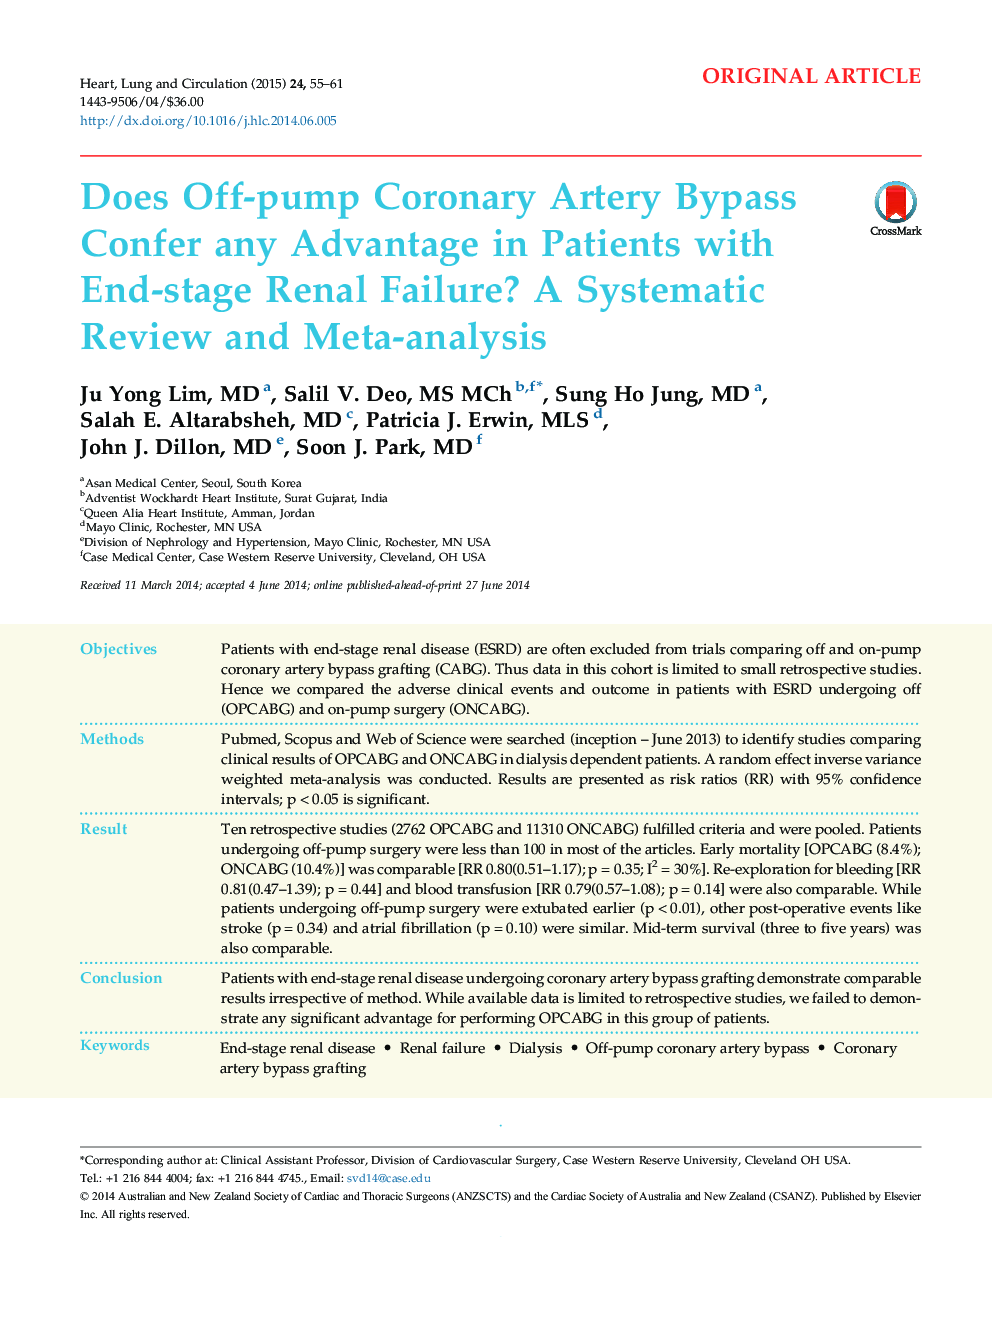 Does Off-pump Coronary Artery Bypass Confer any Advantage in Patients with End-stage Renal Failure? A Systematic Review and Meta-analysis